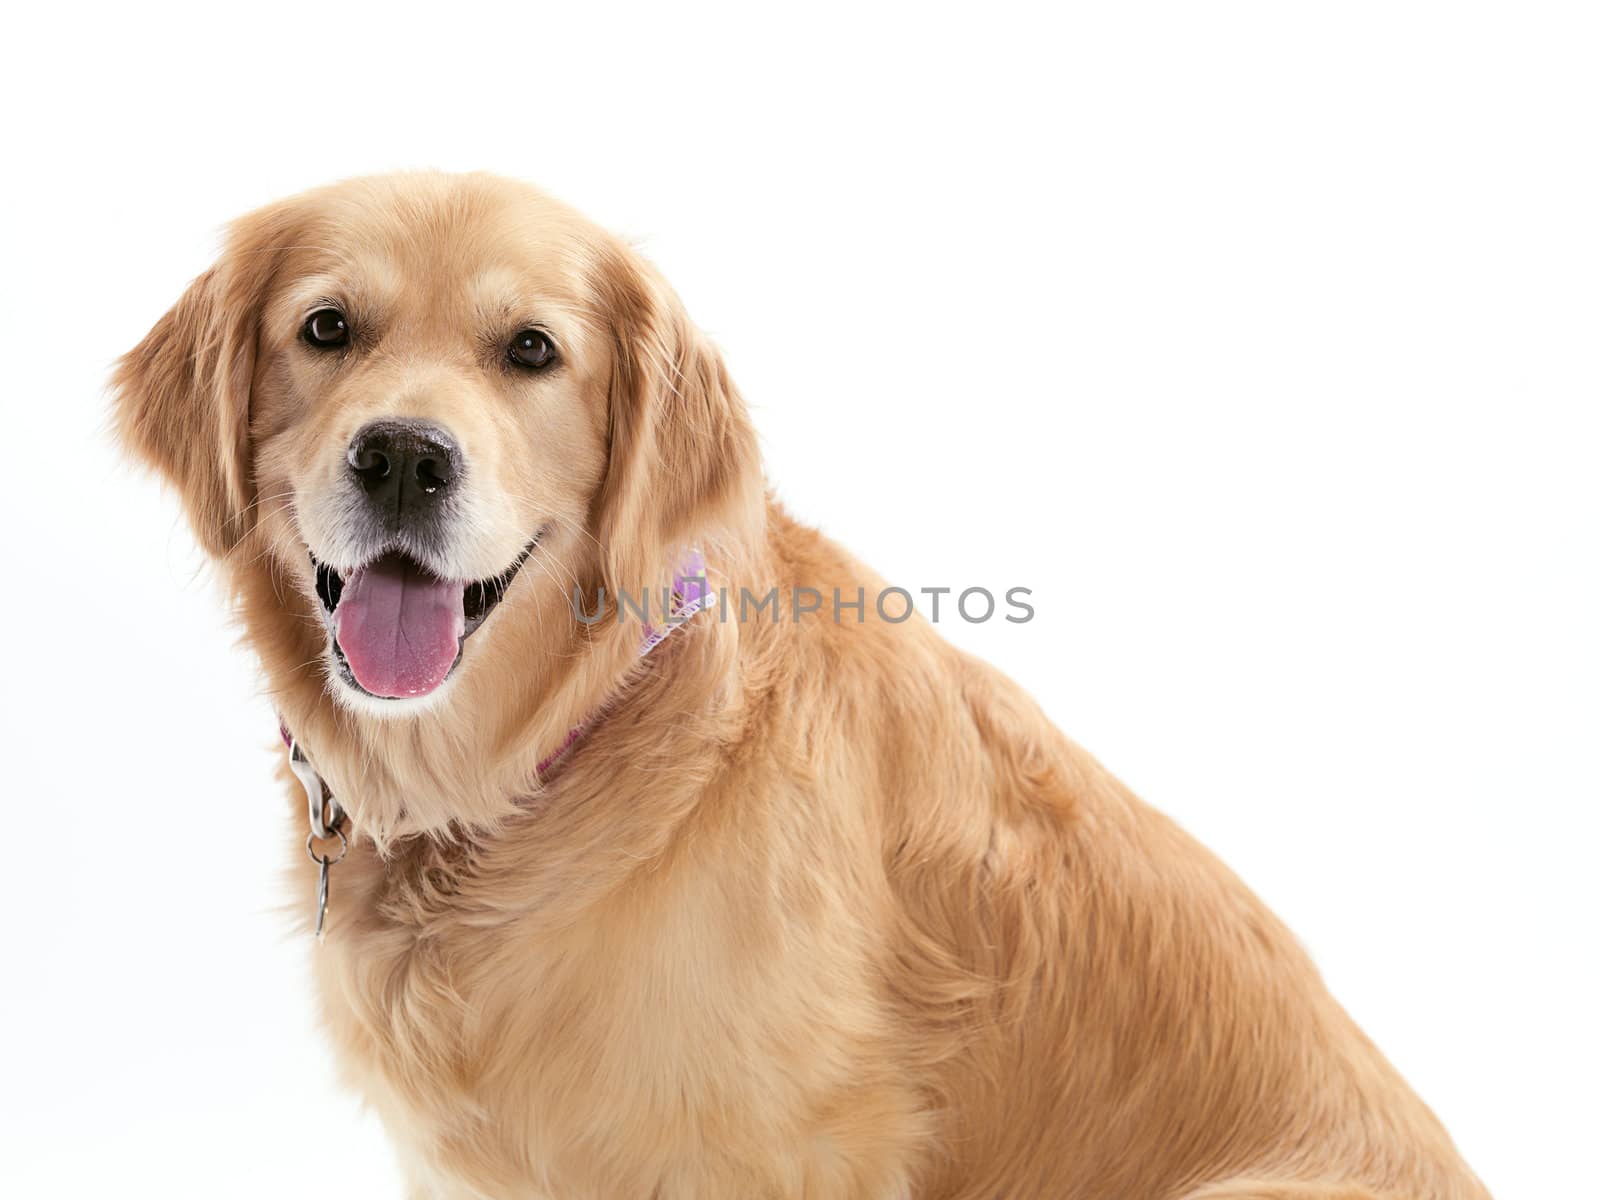 A happy dog on a white background.